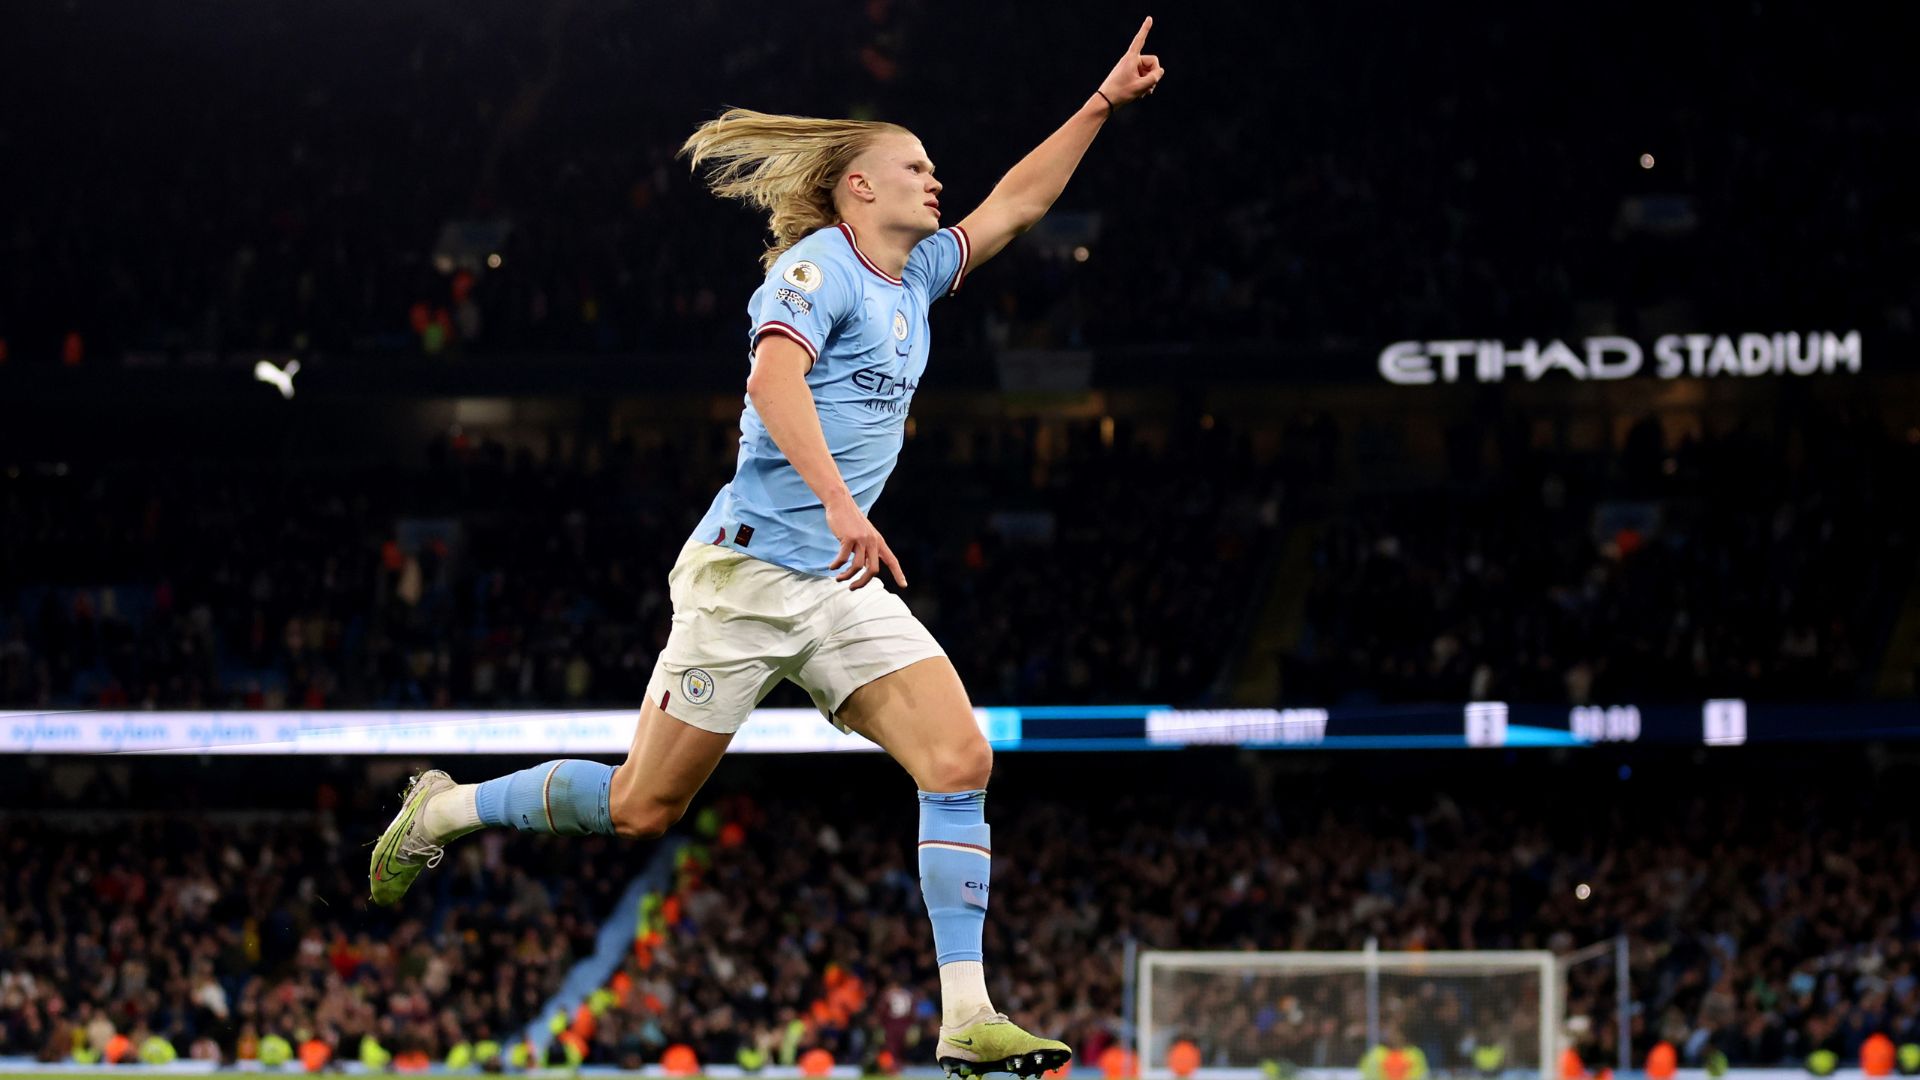 Haaland is Manchester City's top scorer this season with more than 50 goals (Credit: Getty Images)